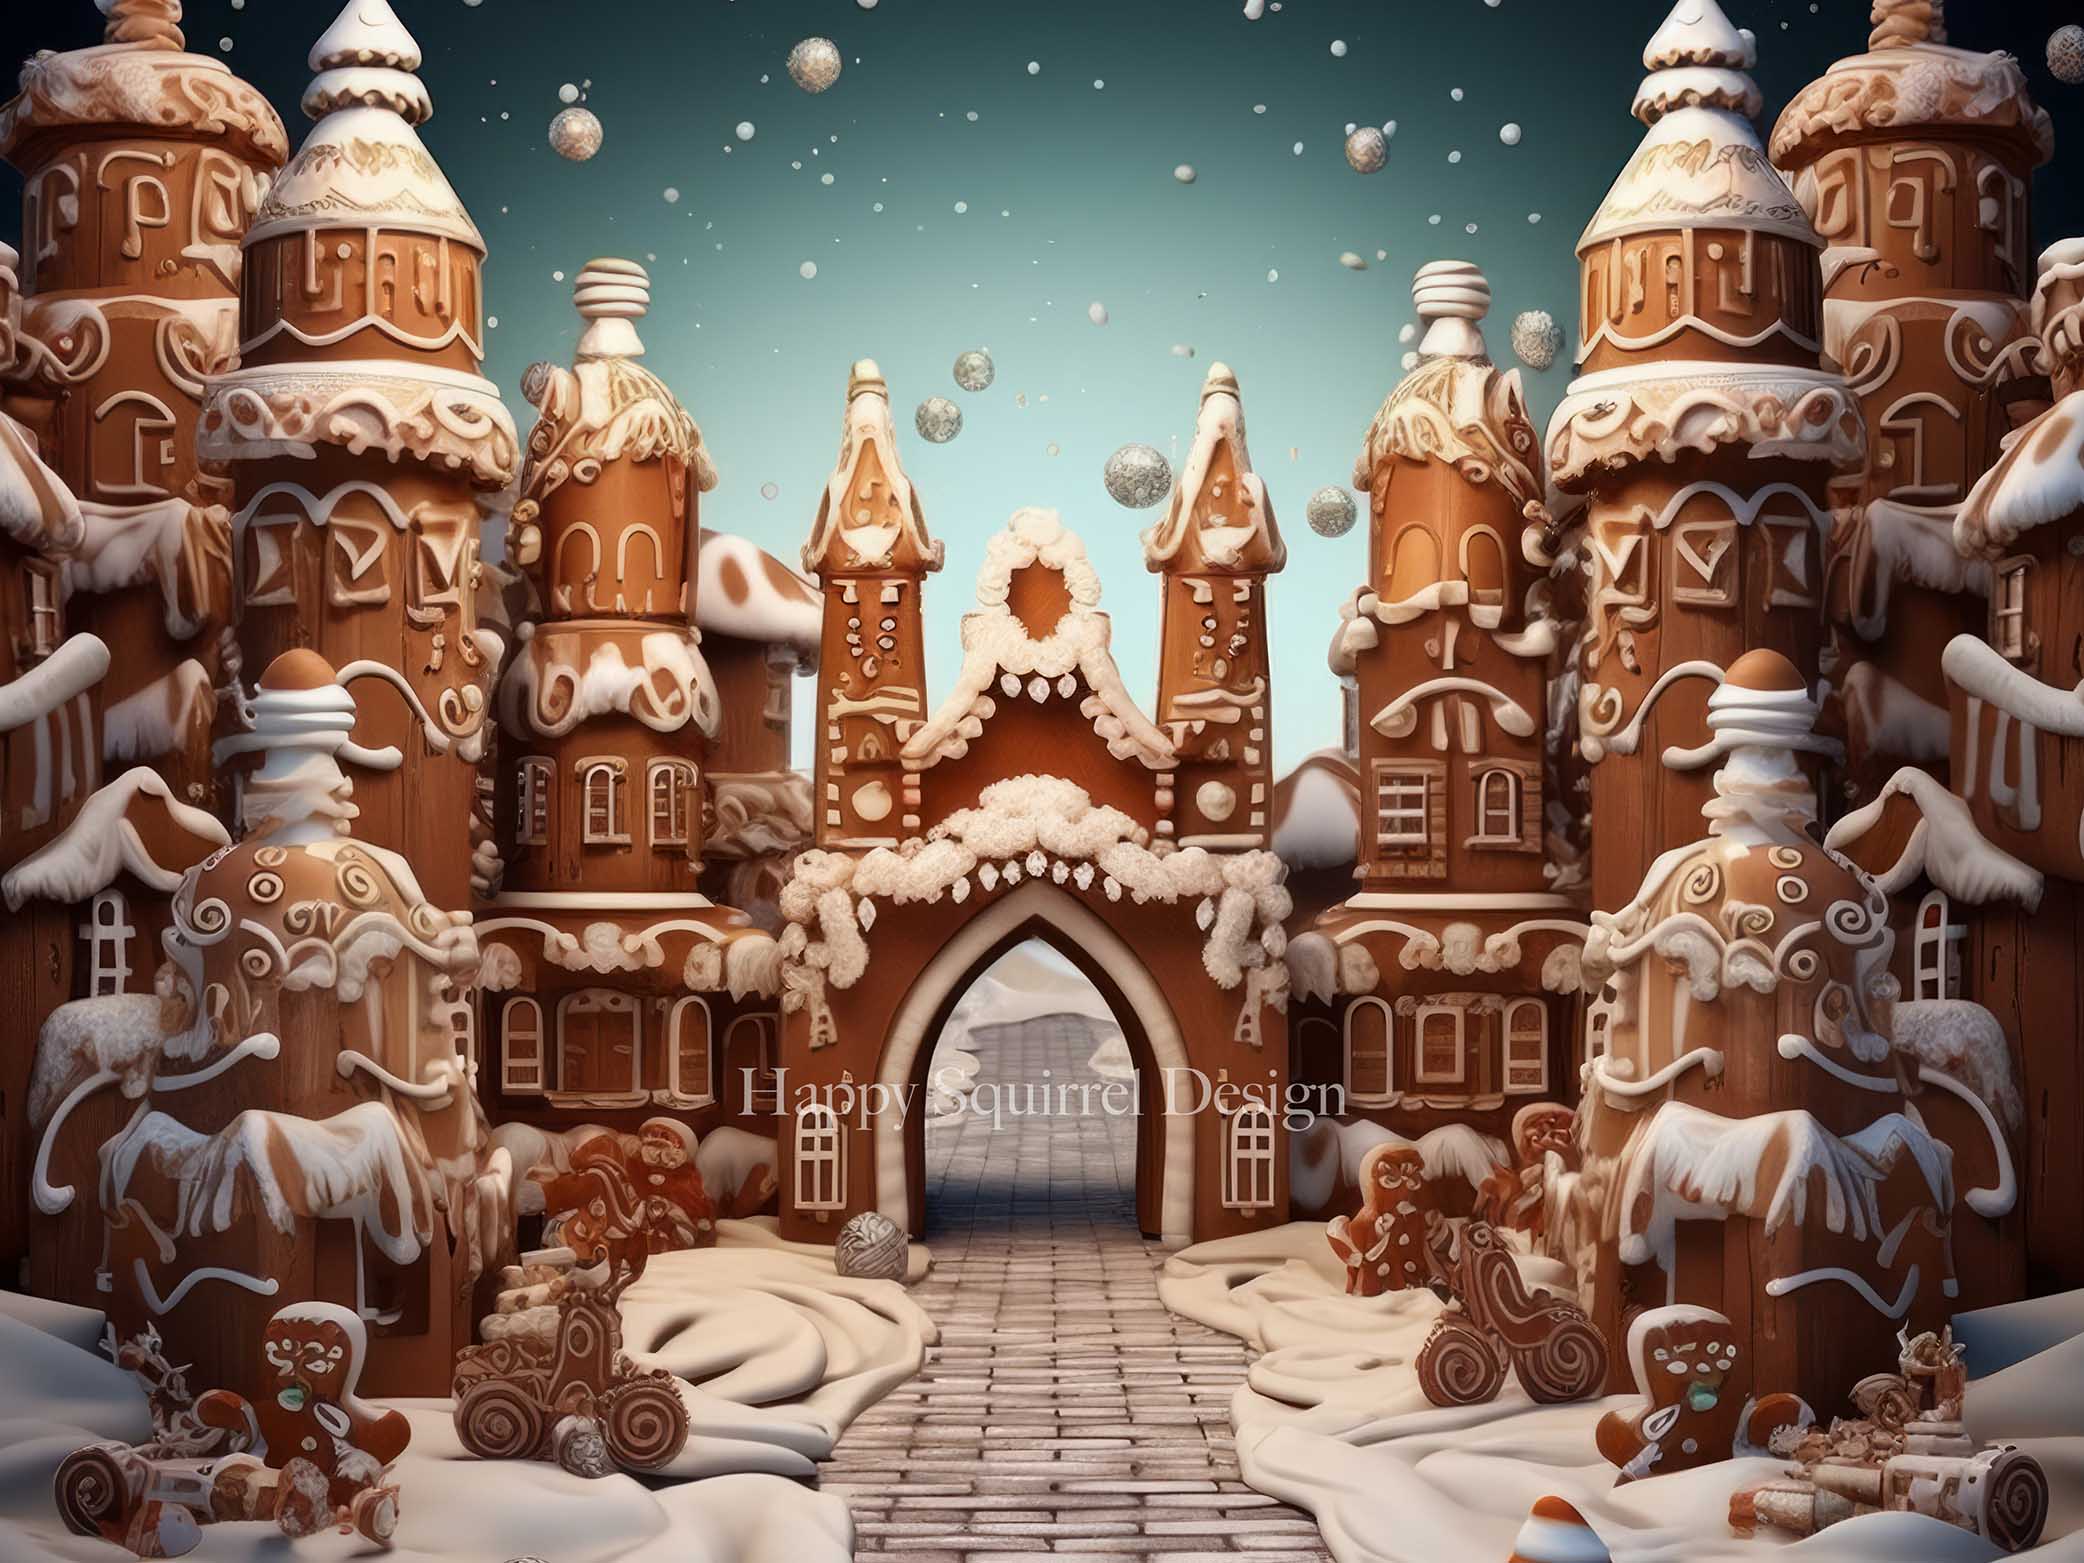 Kate Gingerbread Castle Designed by Happy Squirrel Design